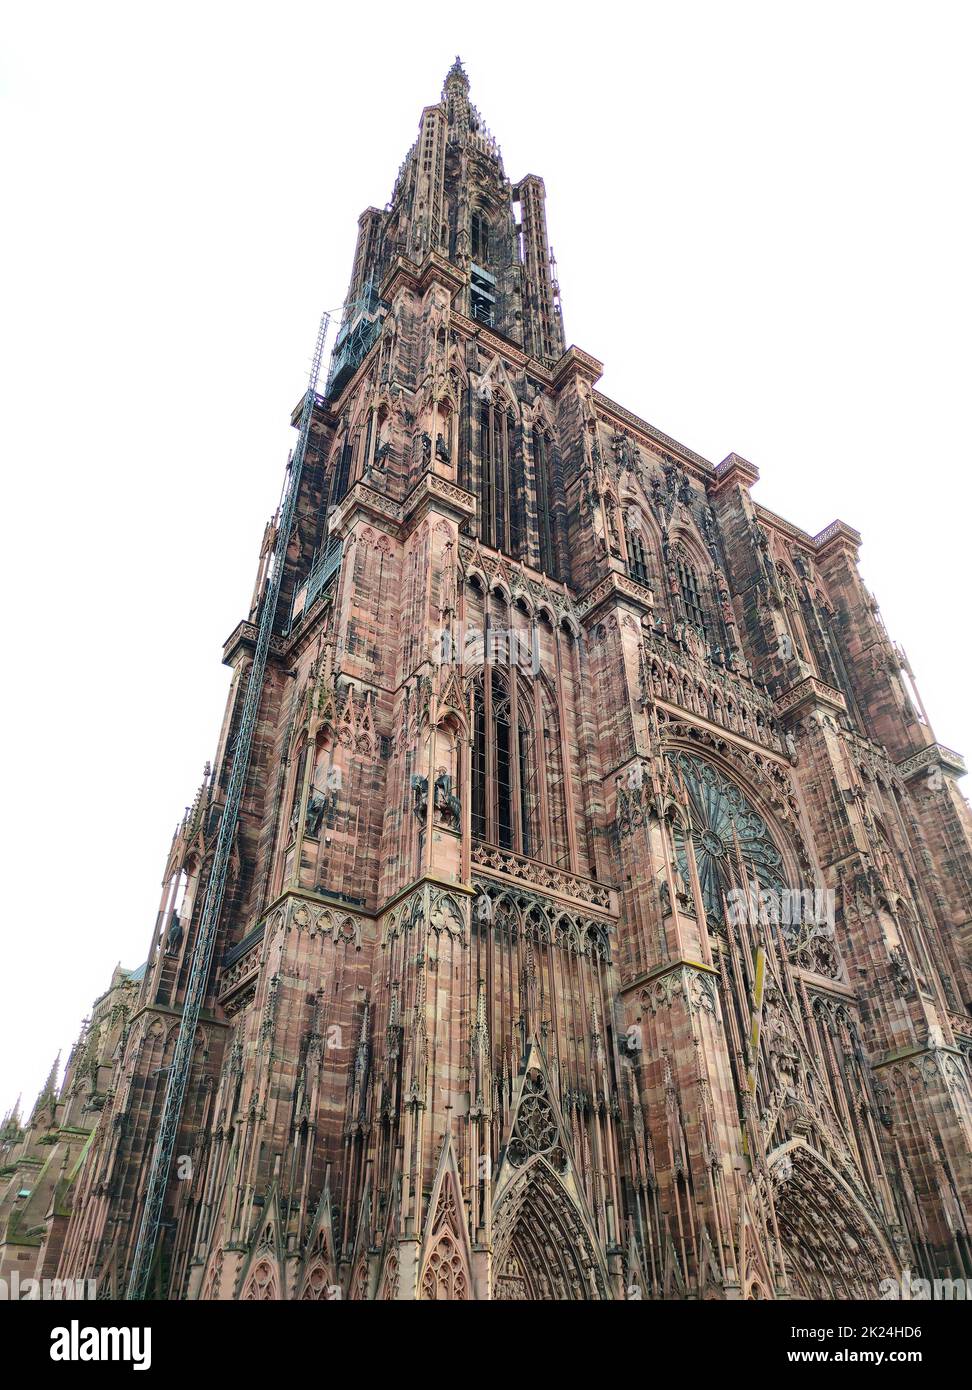 Cathedral of Our Lady or Cathedrale Notre-Dame de Strasbourg, Cathedrale de Strasbourg, Strasbourg Minster in Strasbourg, France. The Roman Catholic c Stock Photo